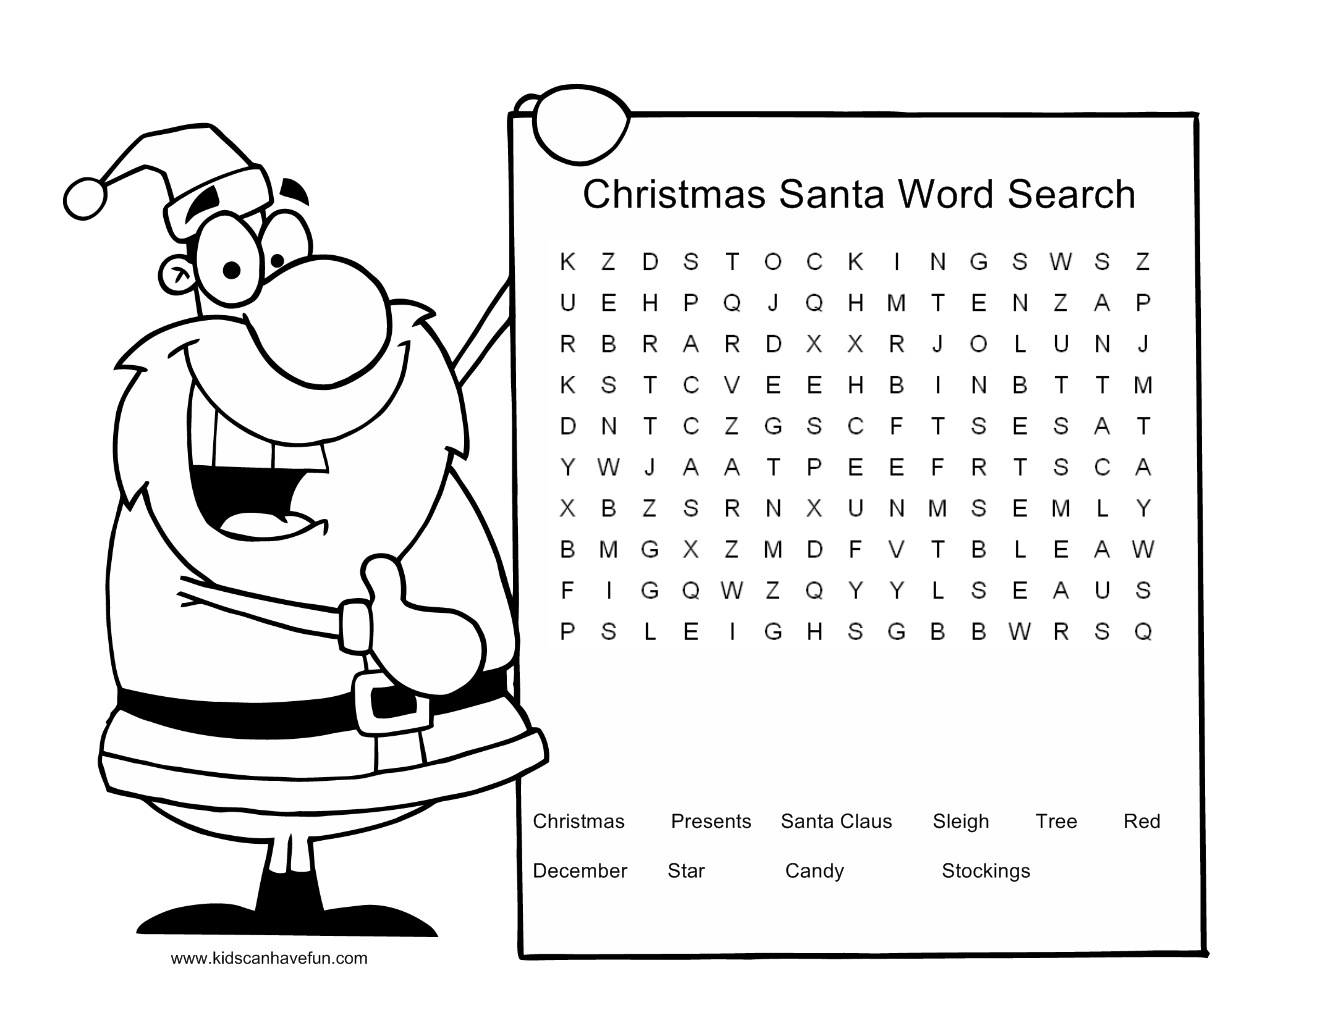 Christmas Word Search Puzzles Printable Image